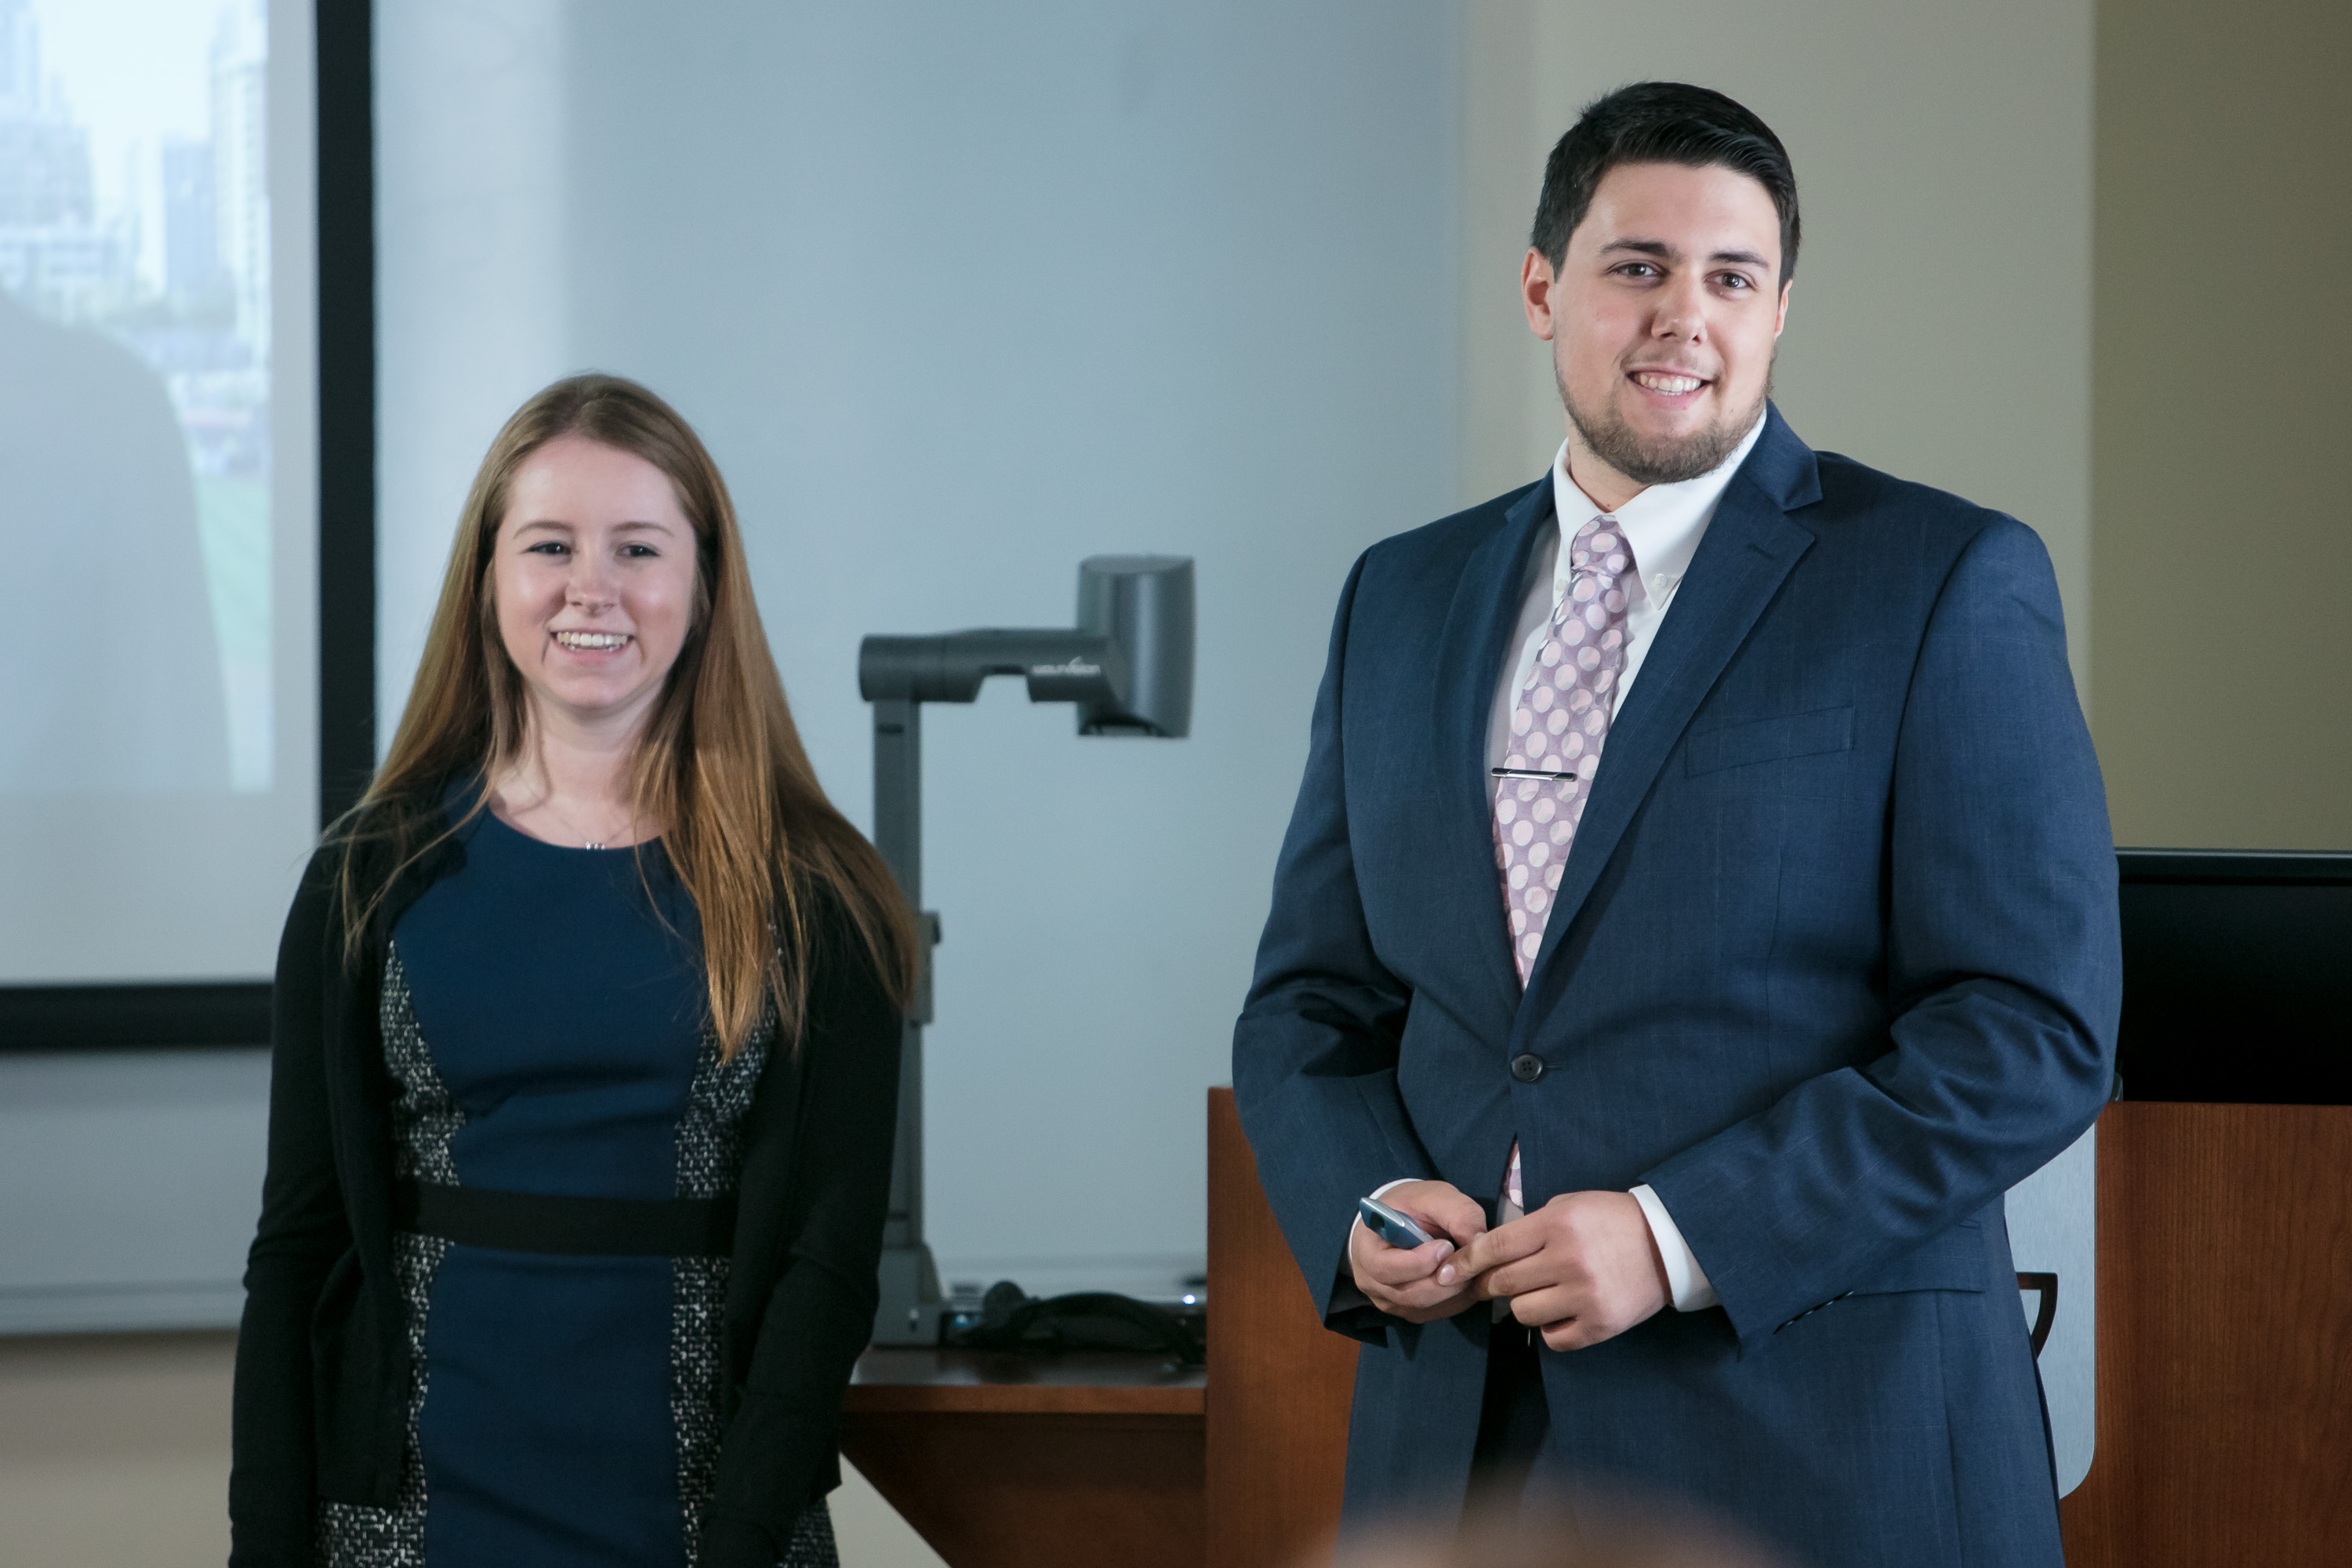 PRAD students Melissa Bellew, left, and Ben Gartland present campaign plan ideas about sustainability to FOX Sports, 21st Century Fox and Major League Baseball executives. (DePaul University/Jeff Carrion)